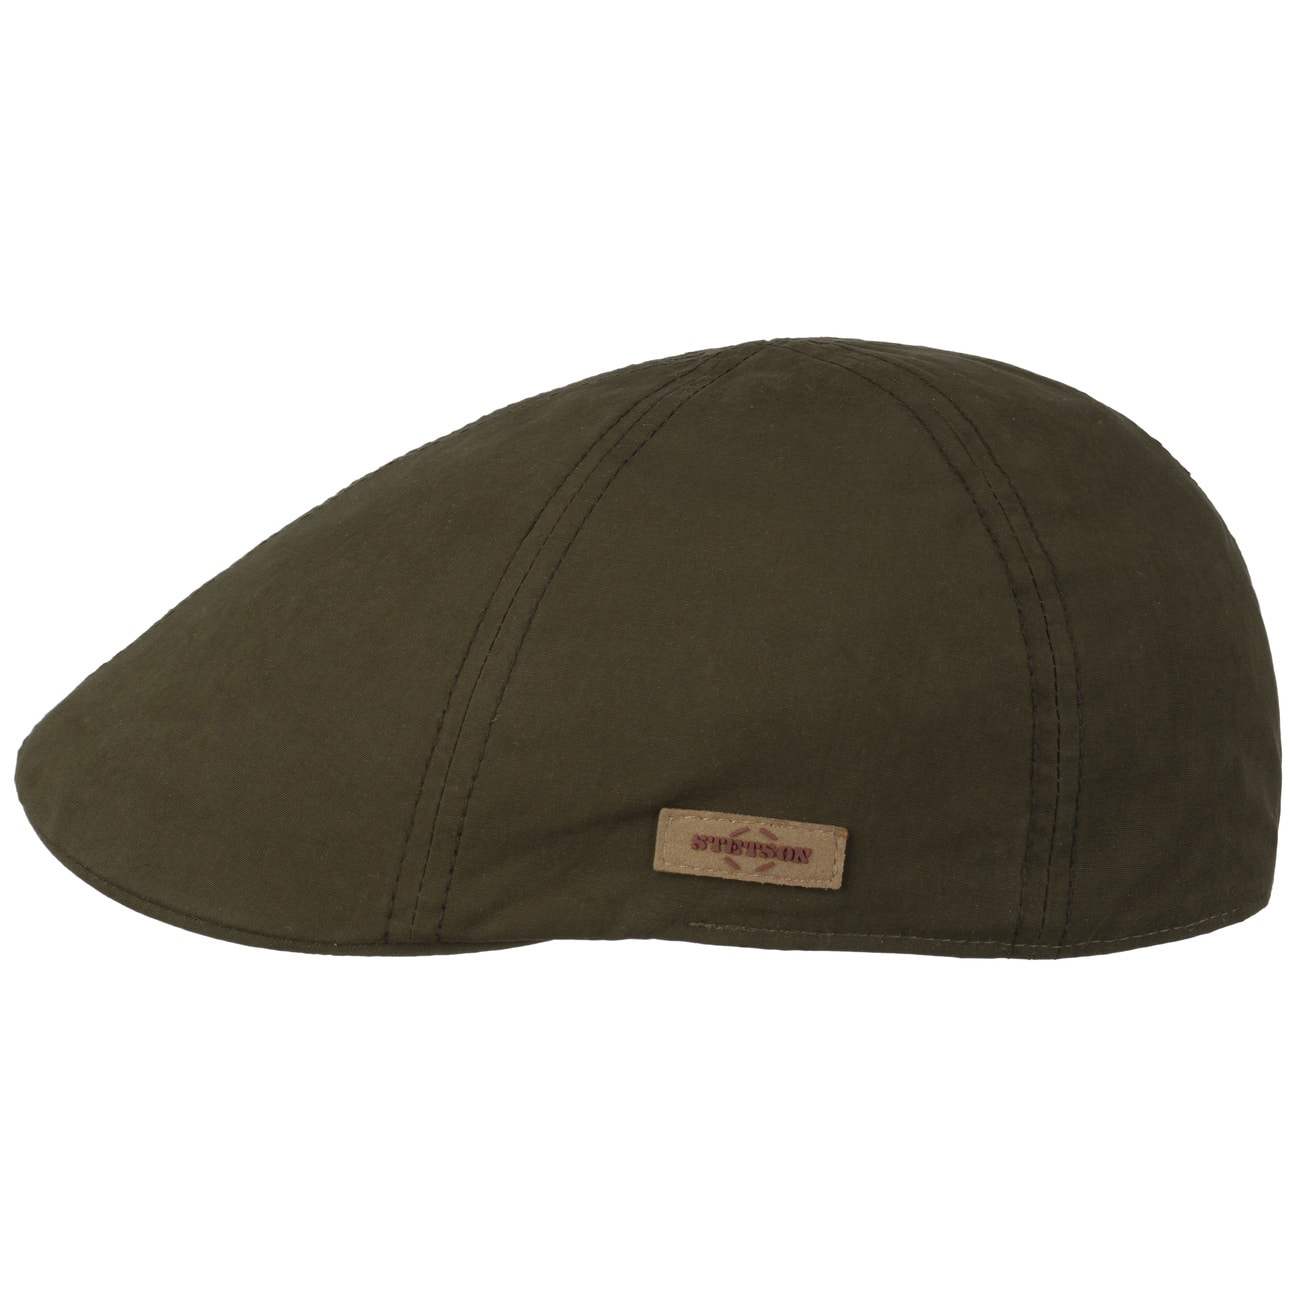 Stetson - Texas Waxed Cotton WR Flat Cap - Olive